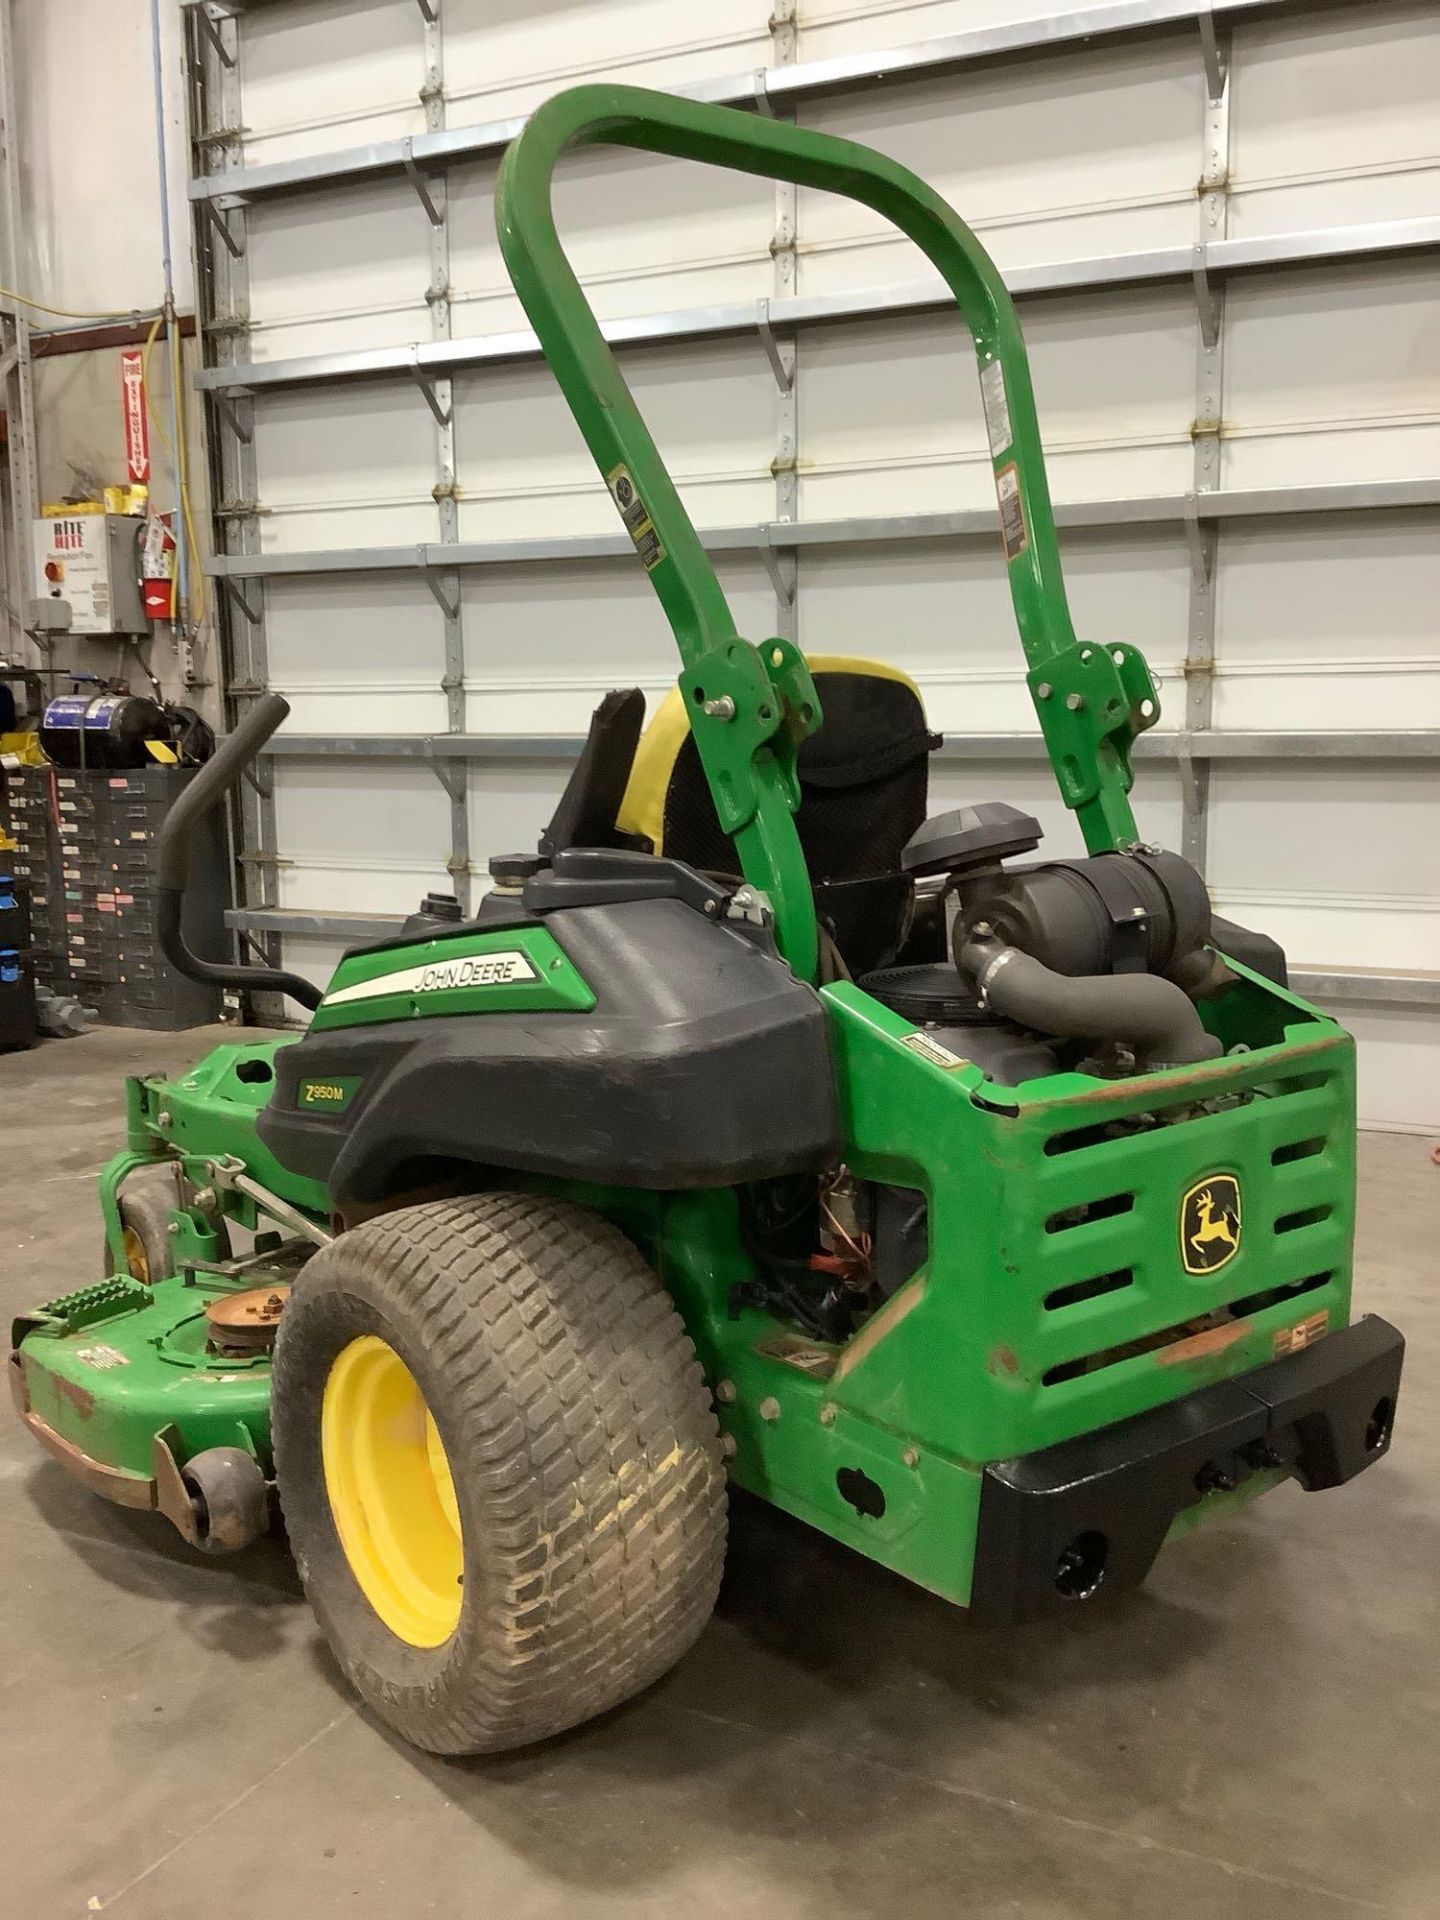 2016 JOHN DEERE COMMERCIAL MOWER MODEL Z950M APPROX 60IN ,GAS POWER, RUNS AND OPERATES - Image 4 of 7